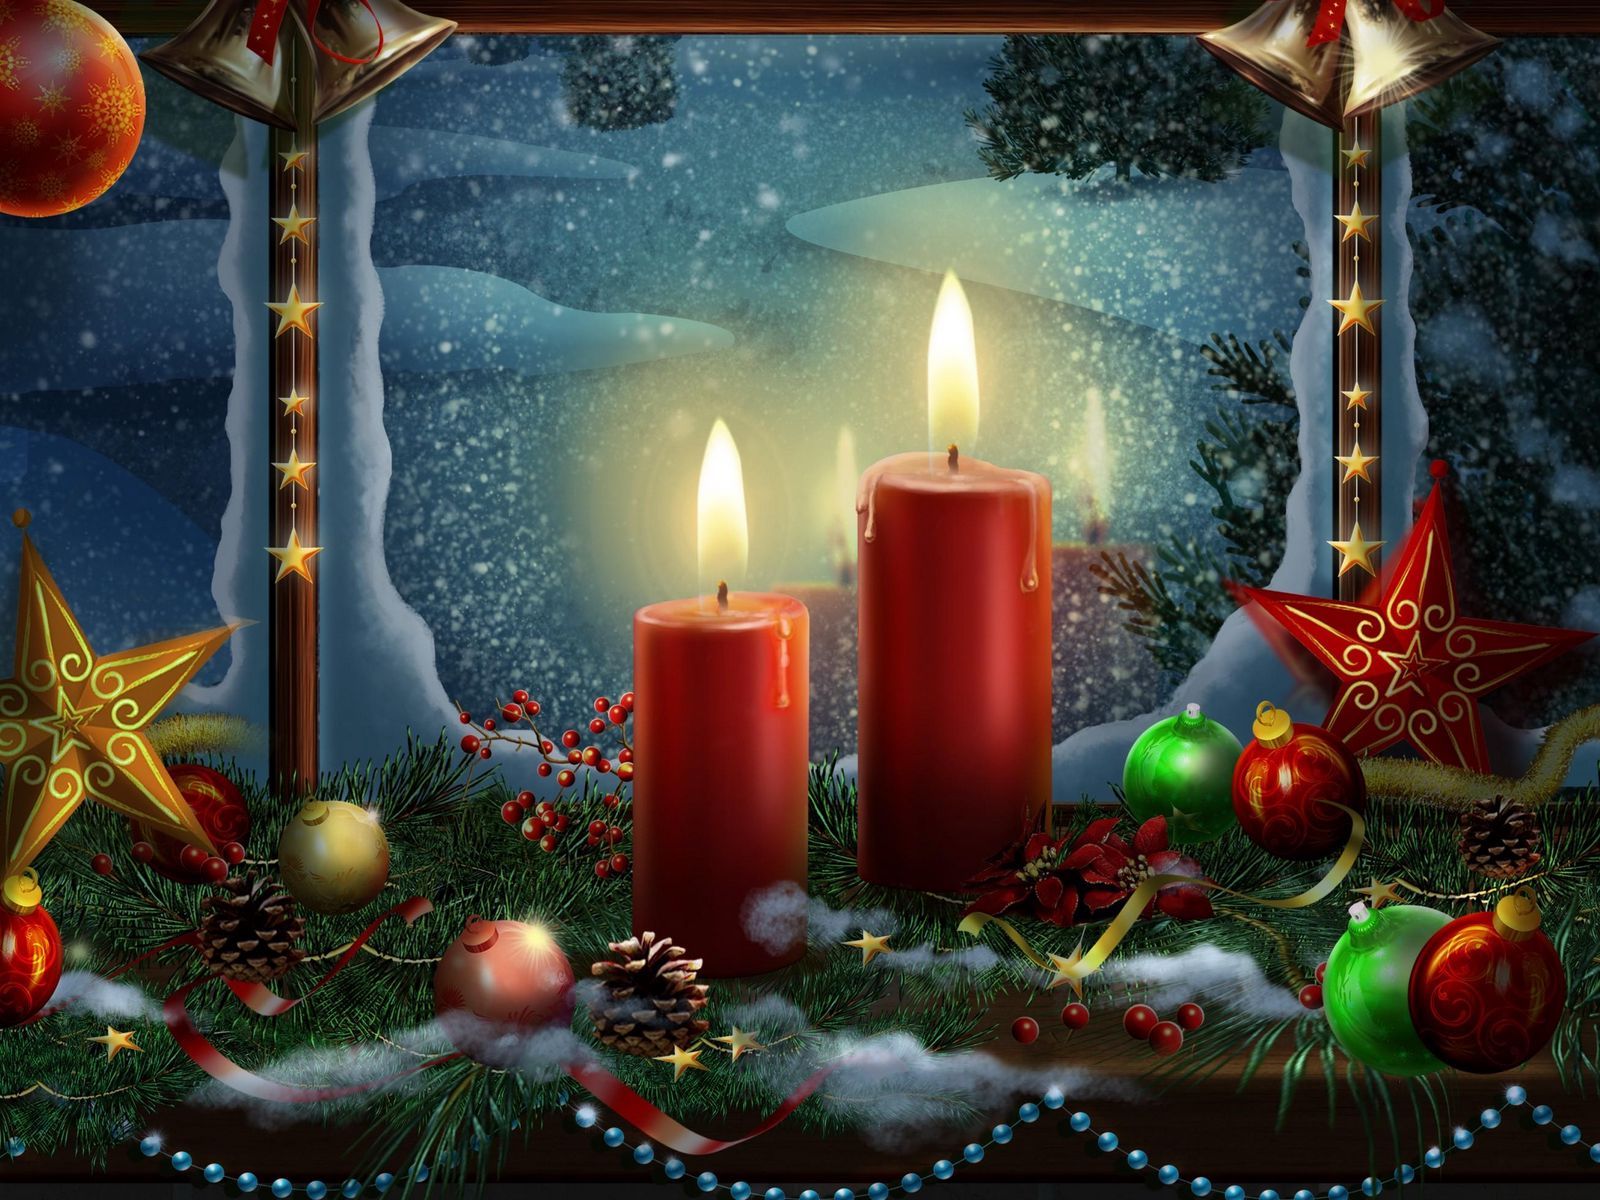 Download wallpaper 1600x1200 new year, holiday candles, postcards, toys, stars, christmas standard 4:3 HD background